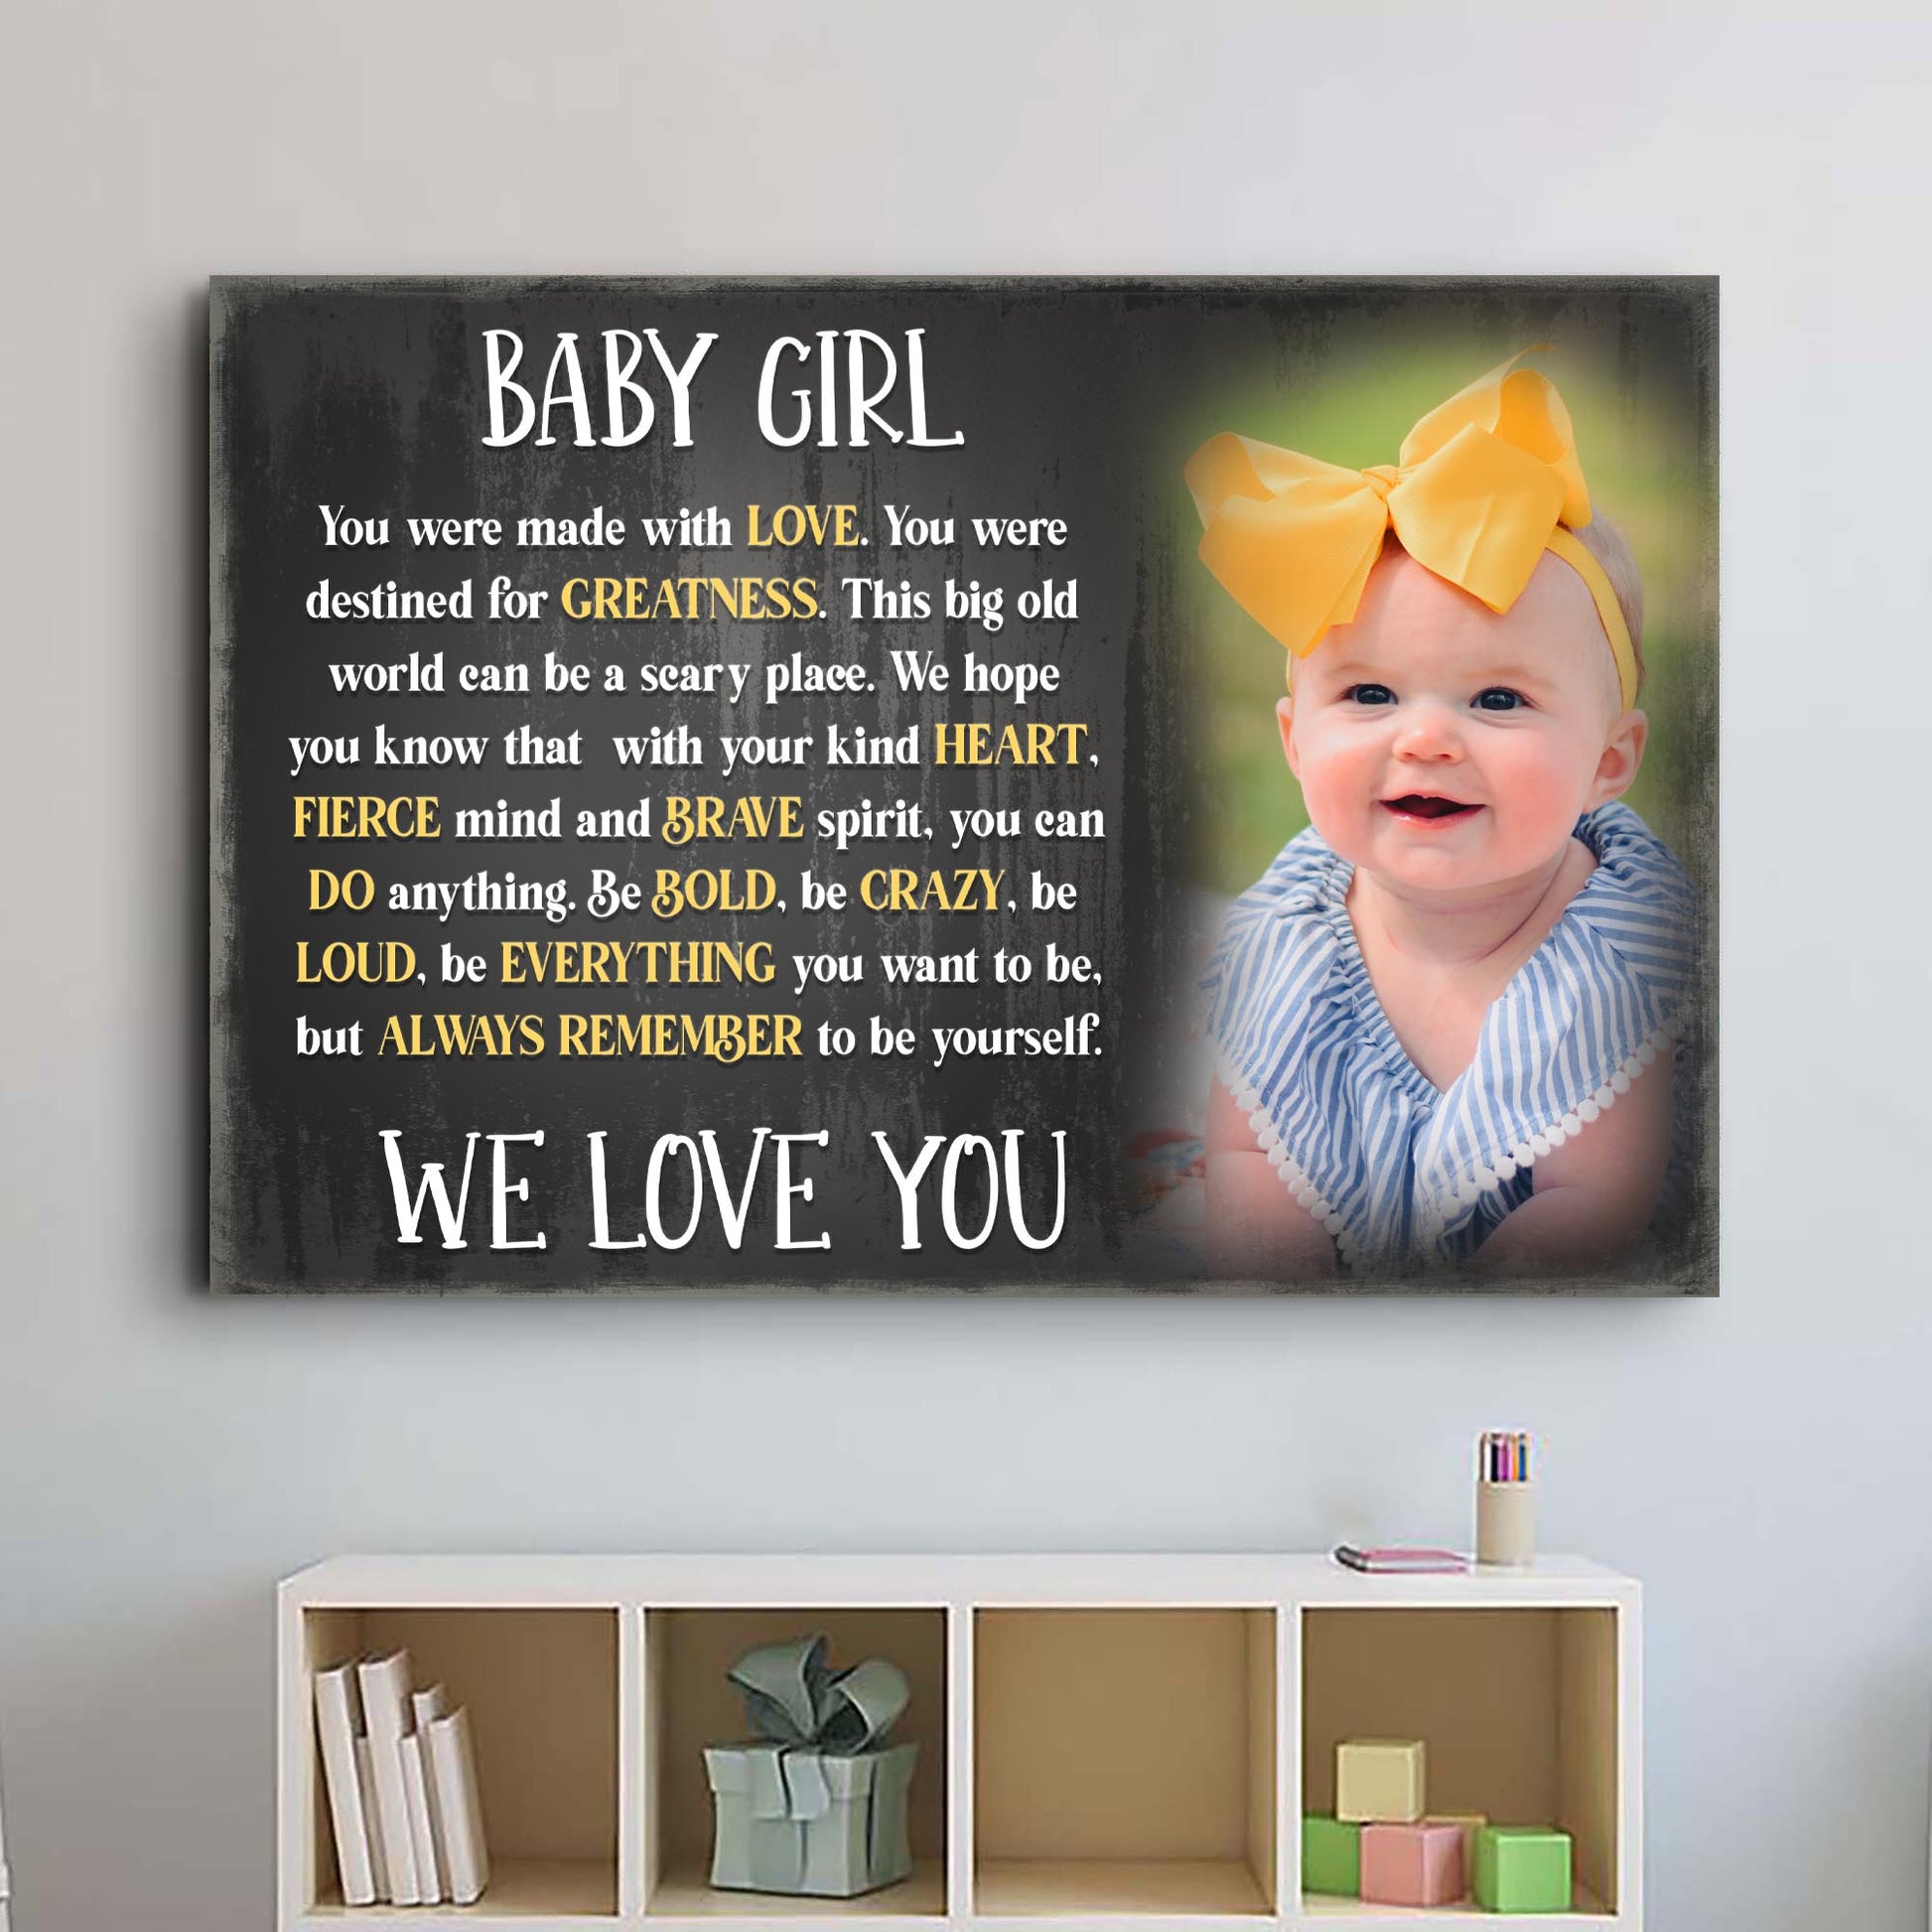 Baby Girl, Be Everything You Want To Be Sign - Image by Tailored Canvases